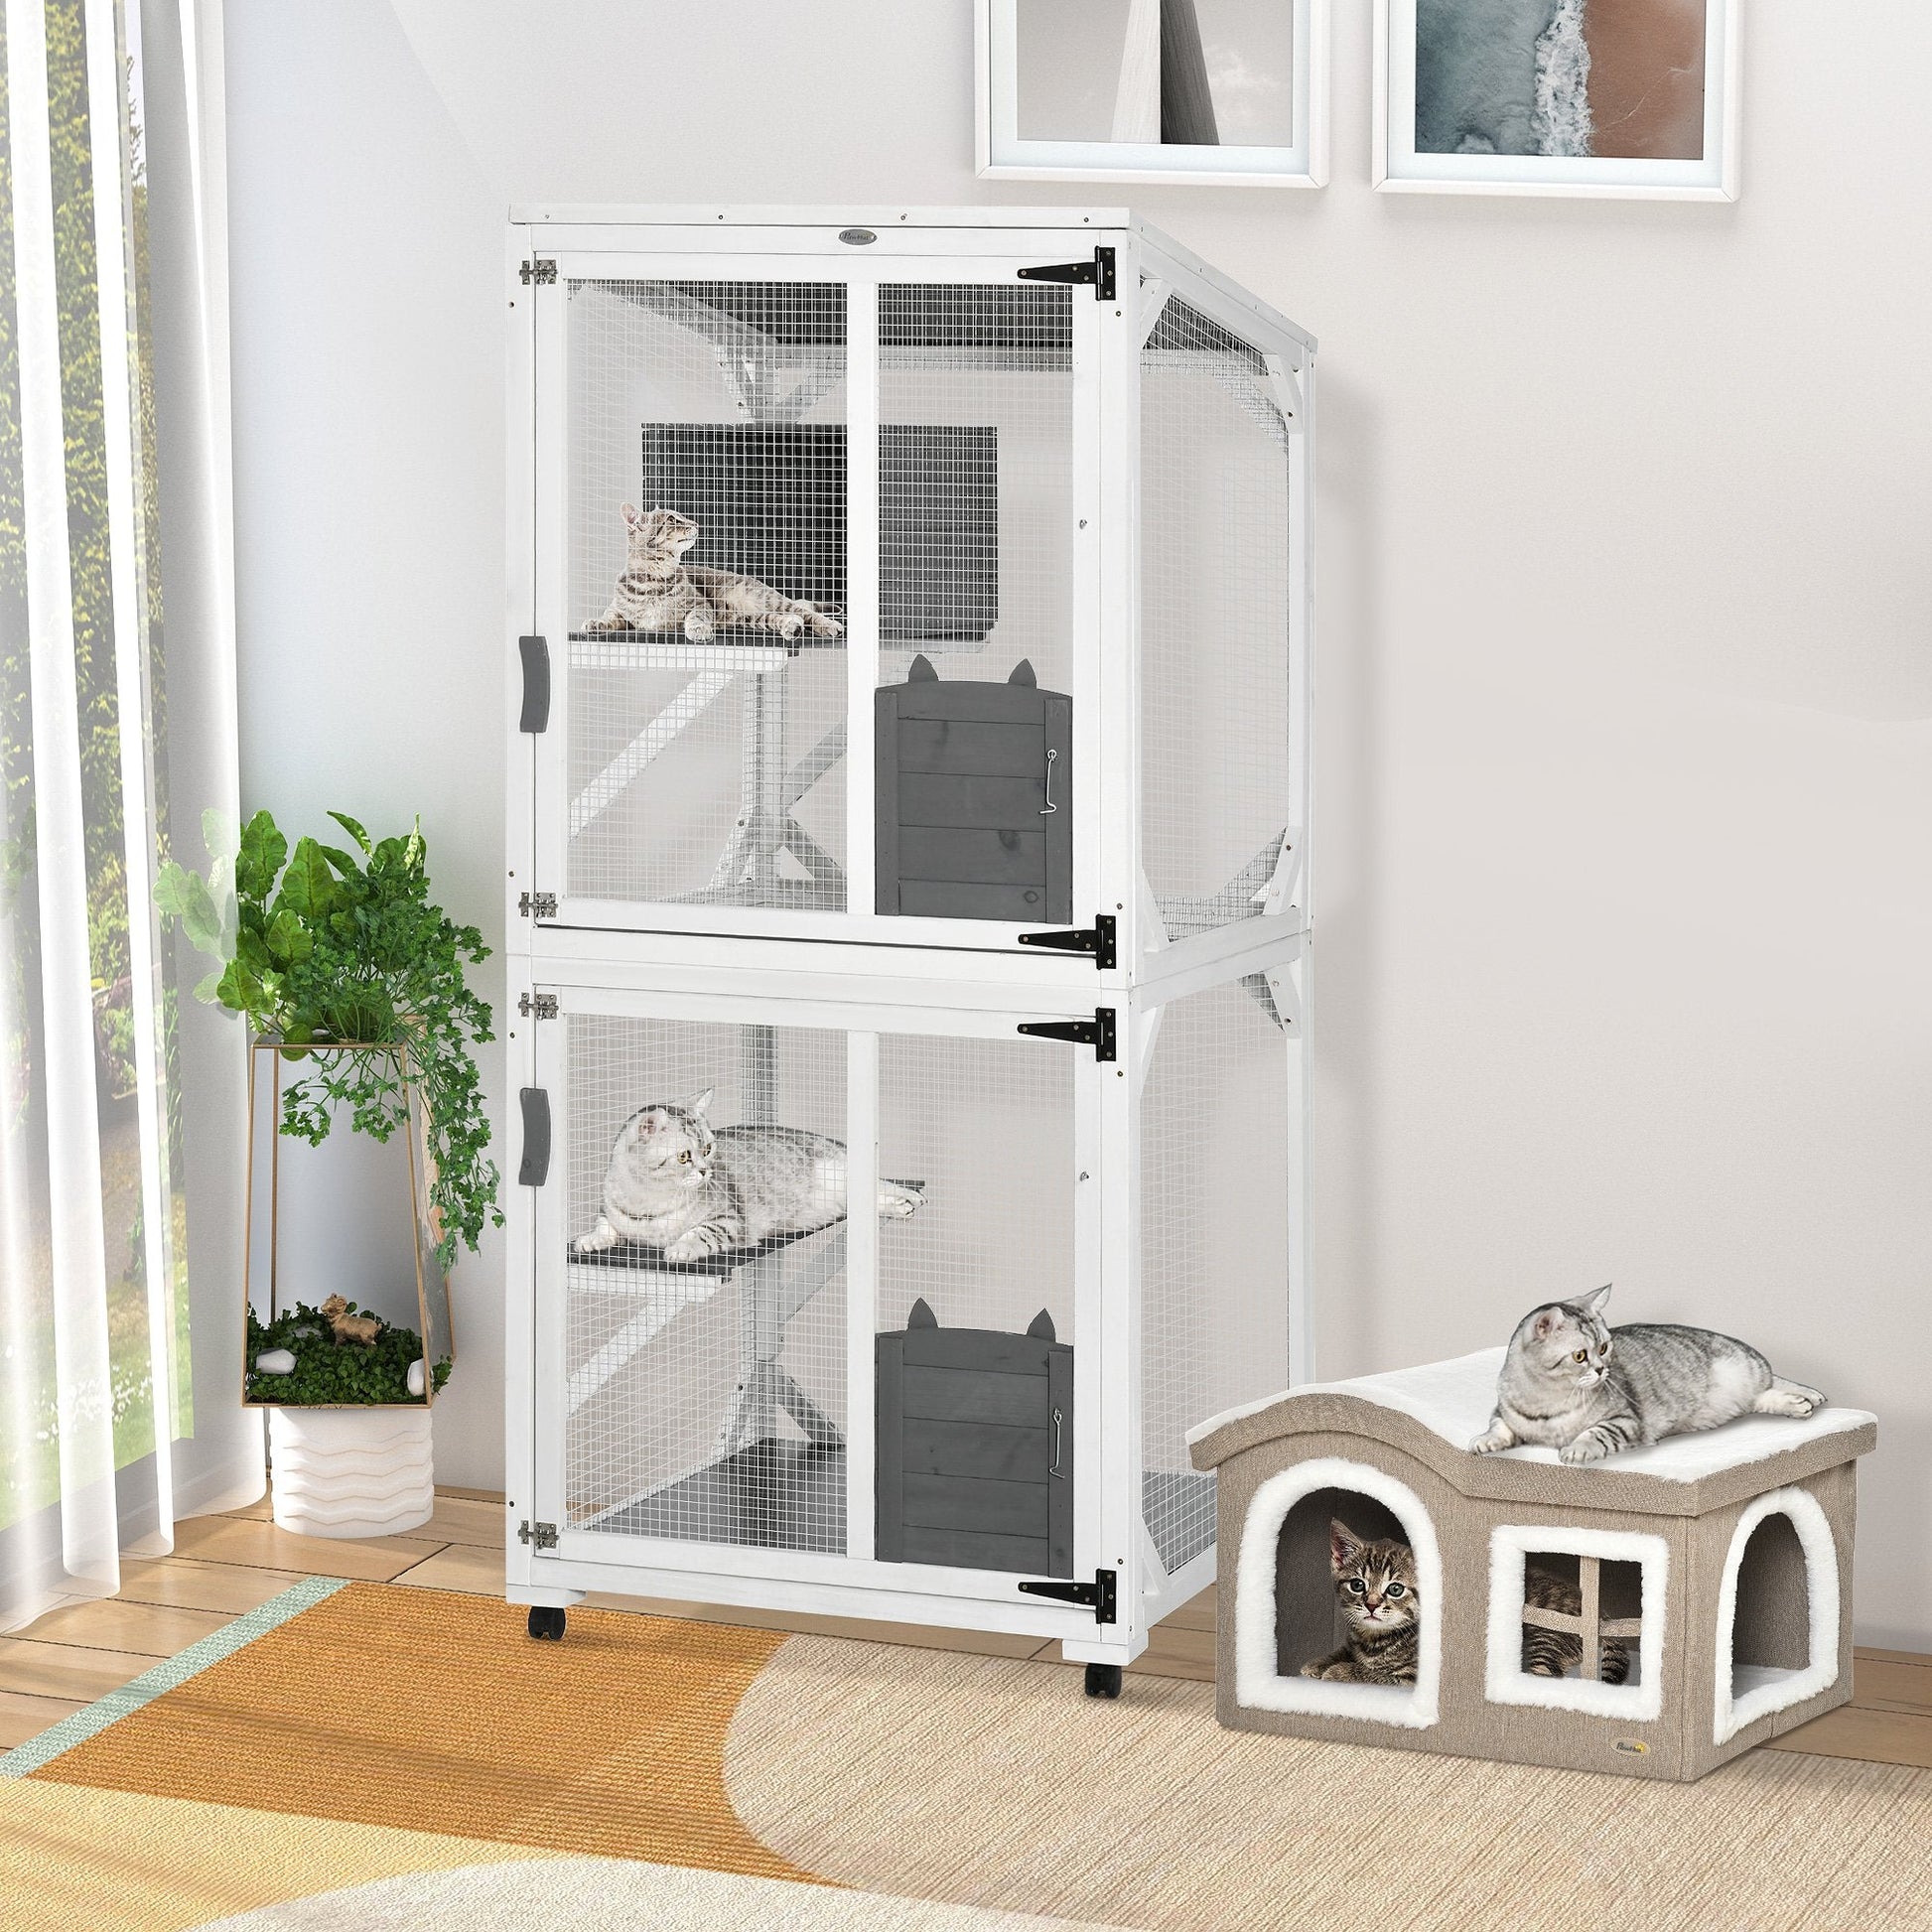 Catio Outdoor, Large Cat Enclosure, Wooden Kitten House, Elevated Design, with Wheels, Resting Box, Water-Resistant, Multi Platforms, for 1-3 Cats - Gallery Canada